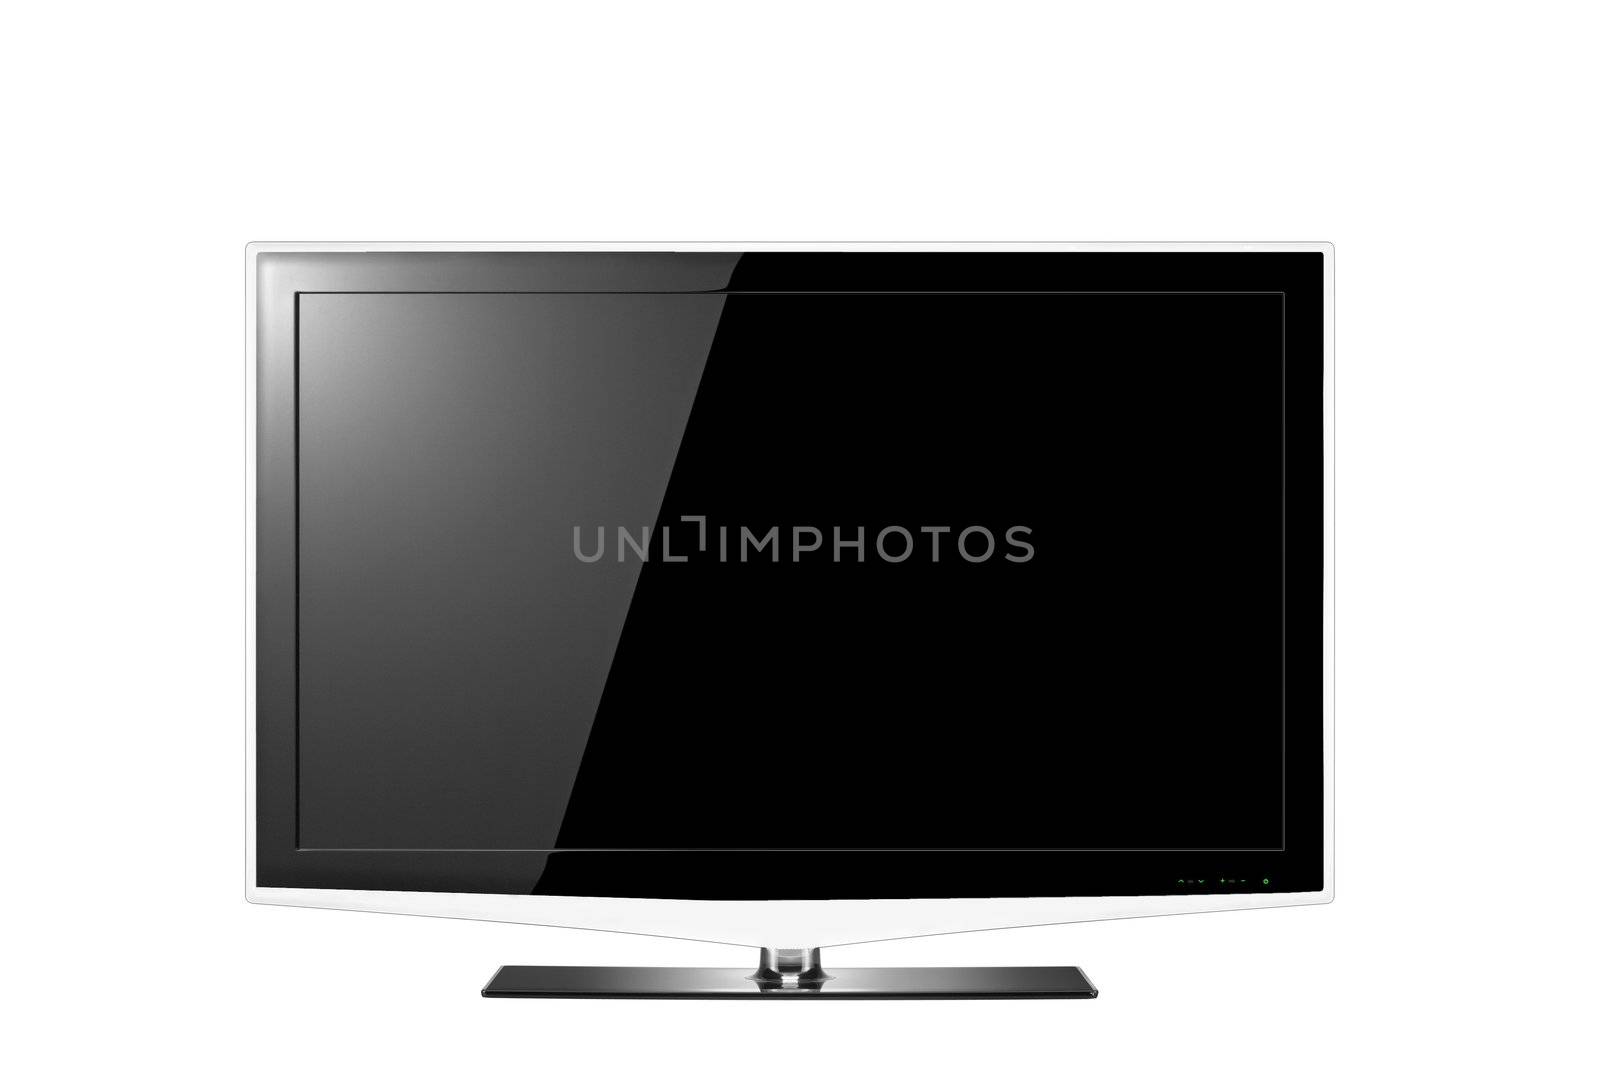 High definition television